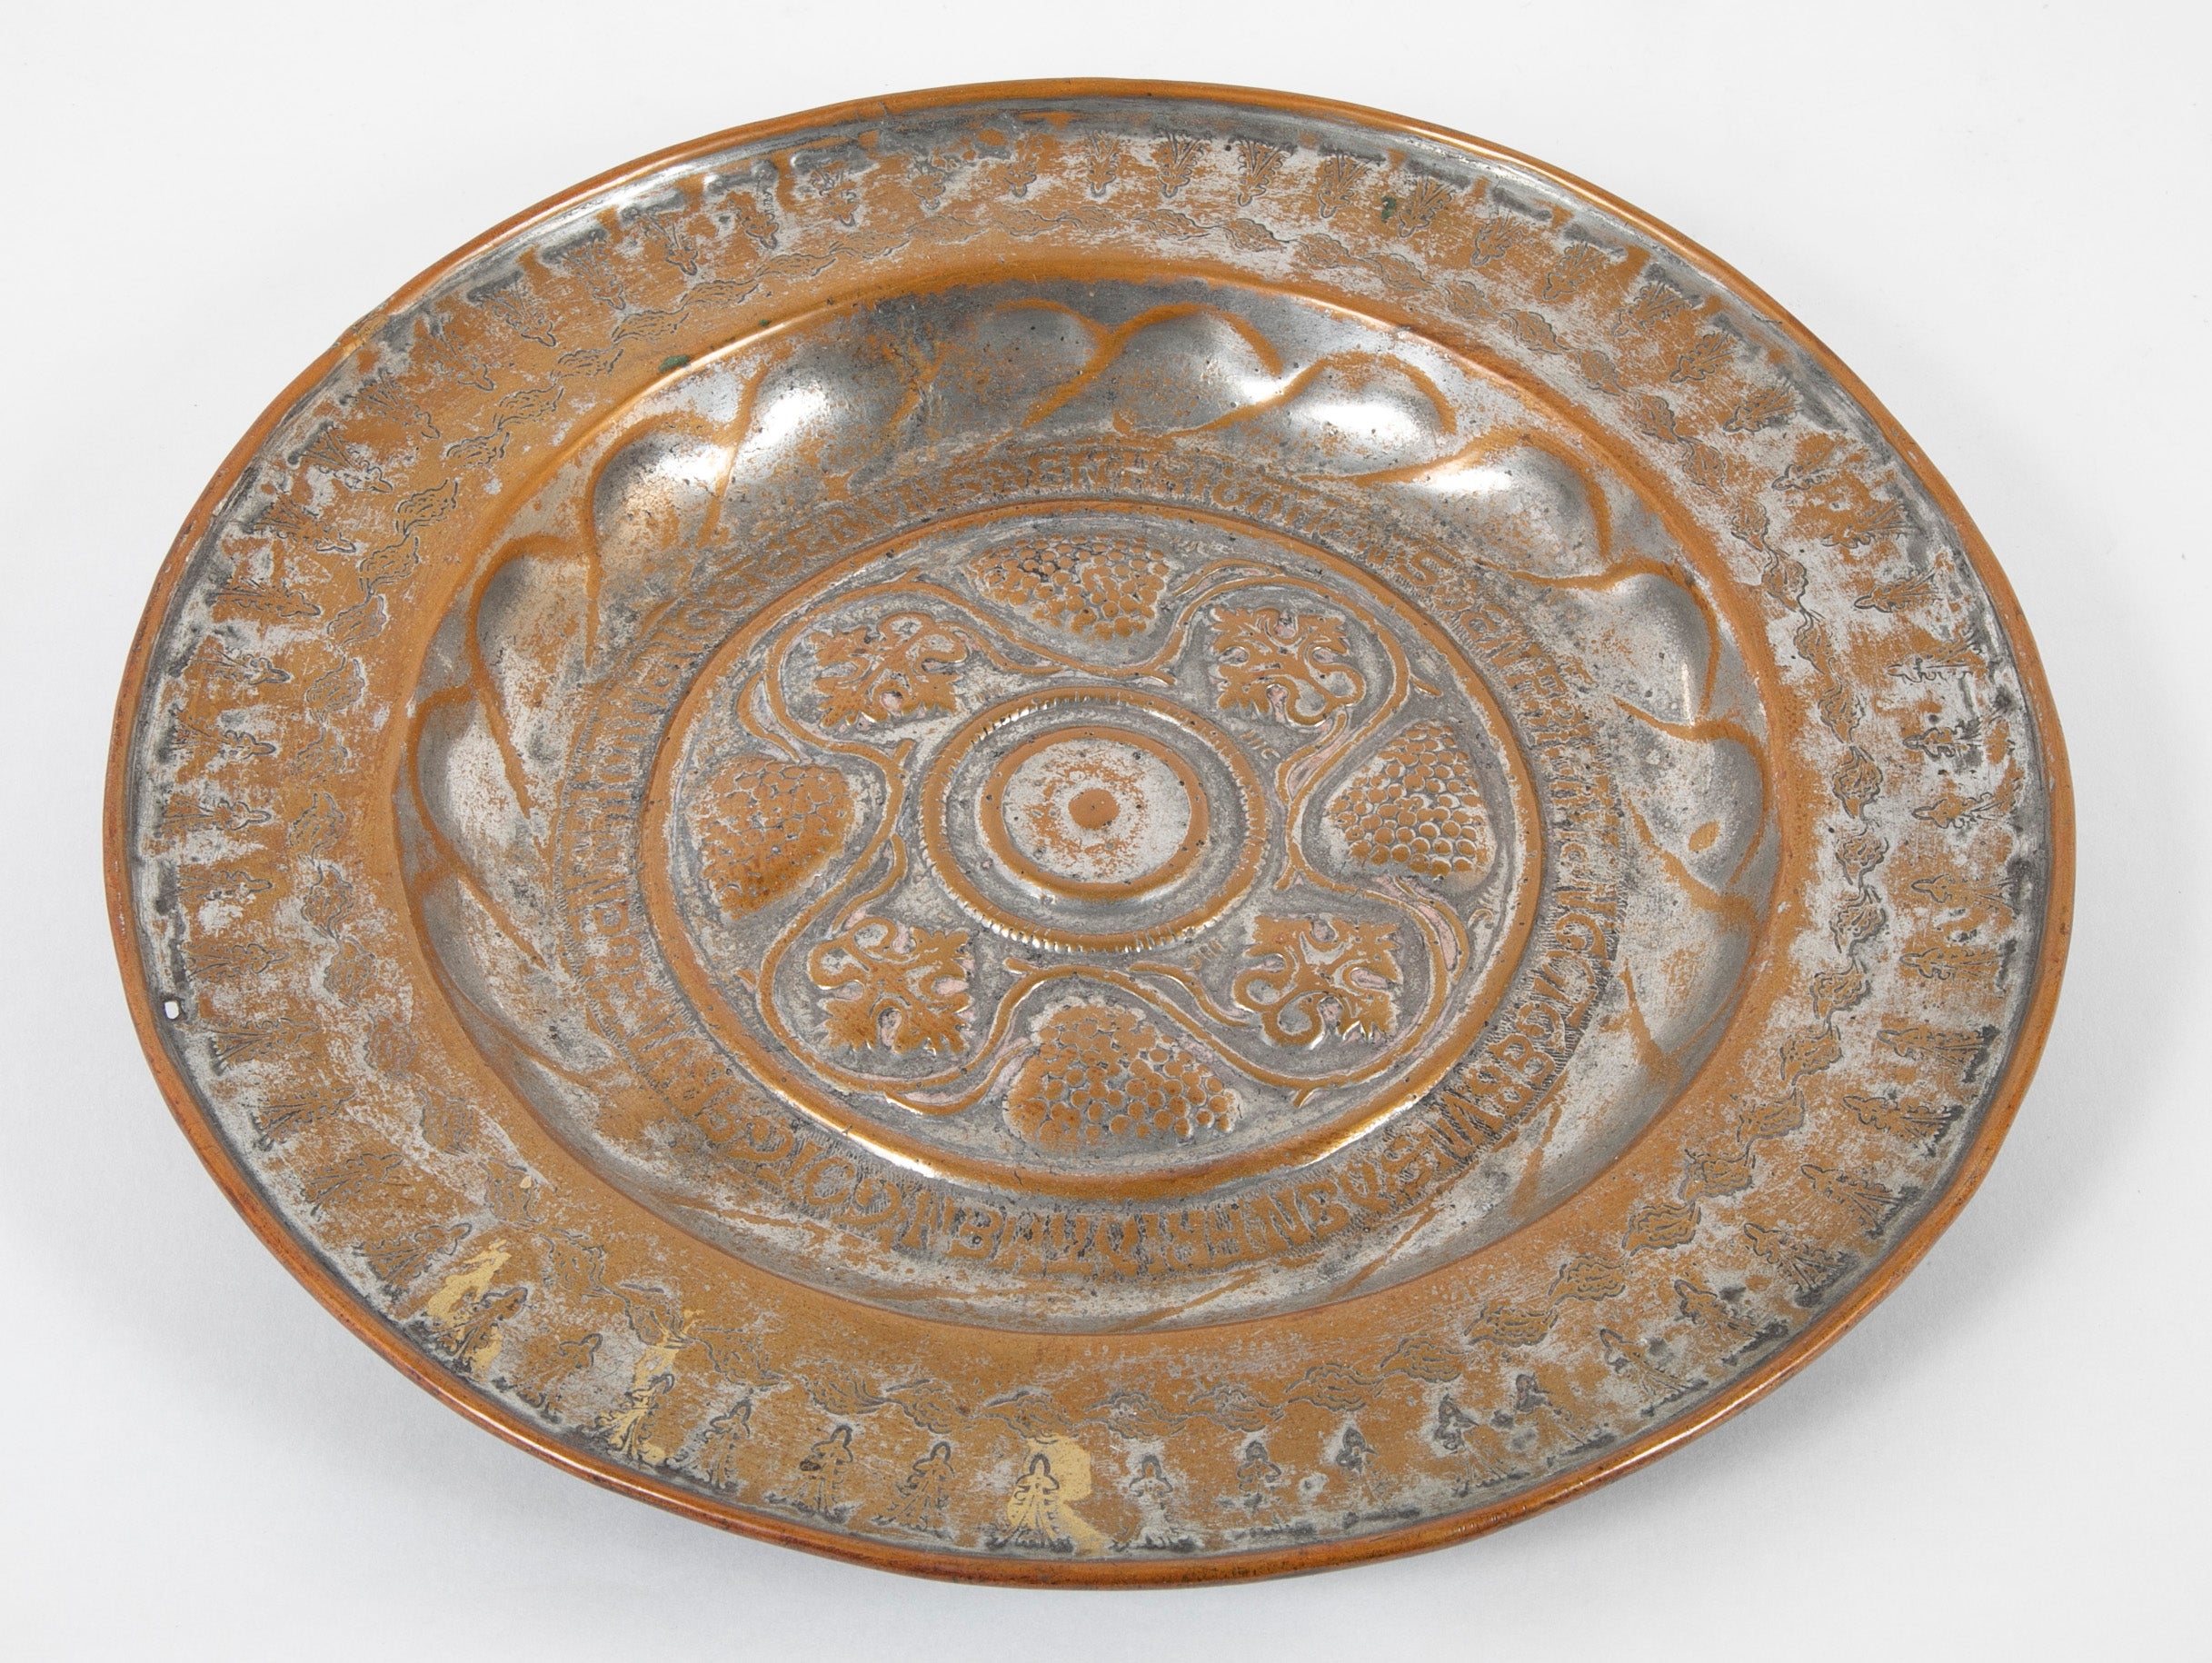 A Late 17th - Early 18th Century Continental Brass Alms Dish